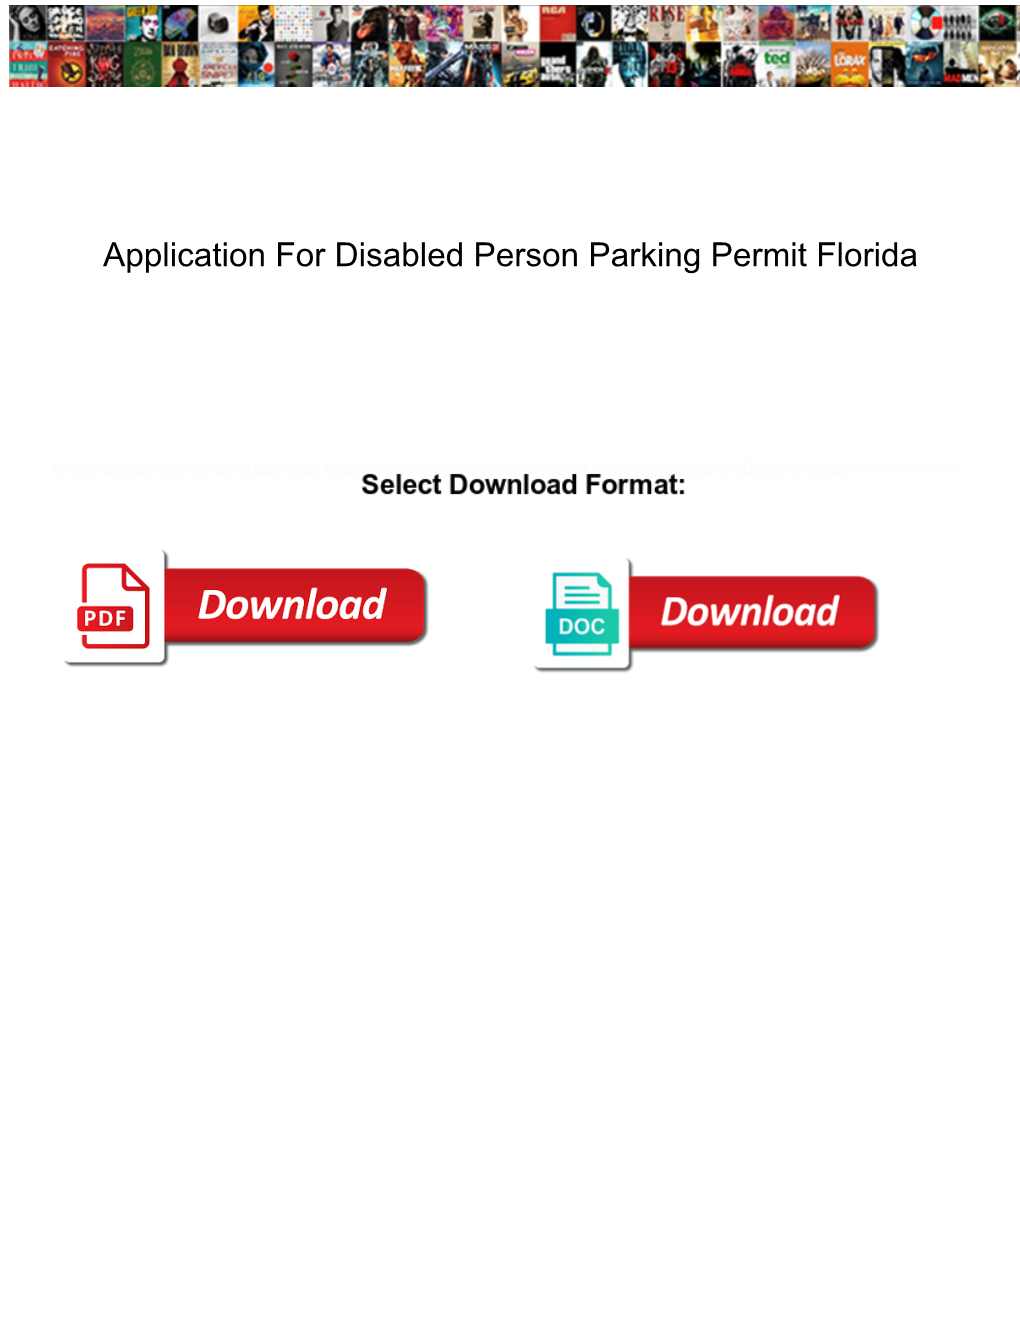 Application for Disabled Person Parking Permit Florida